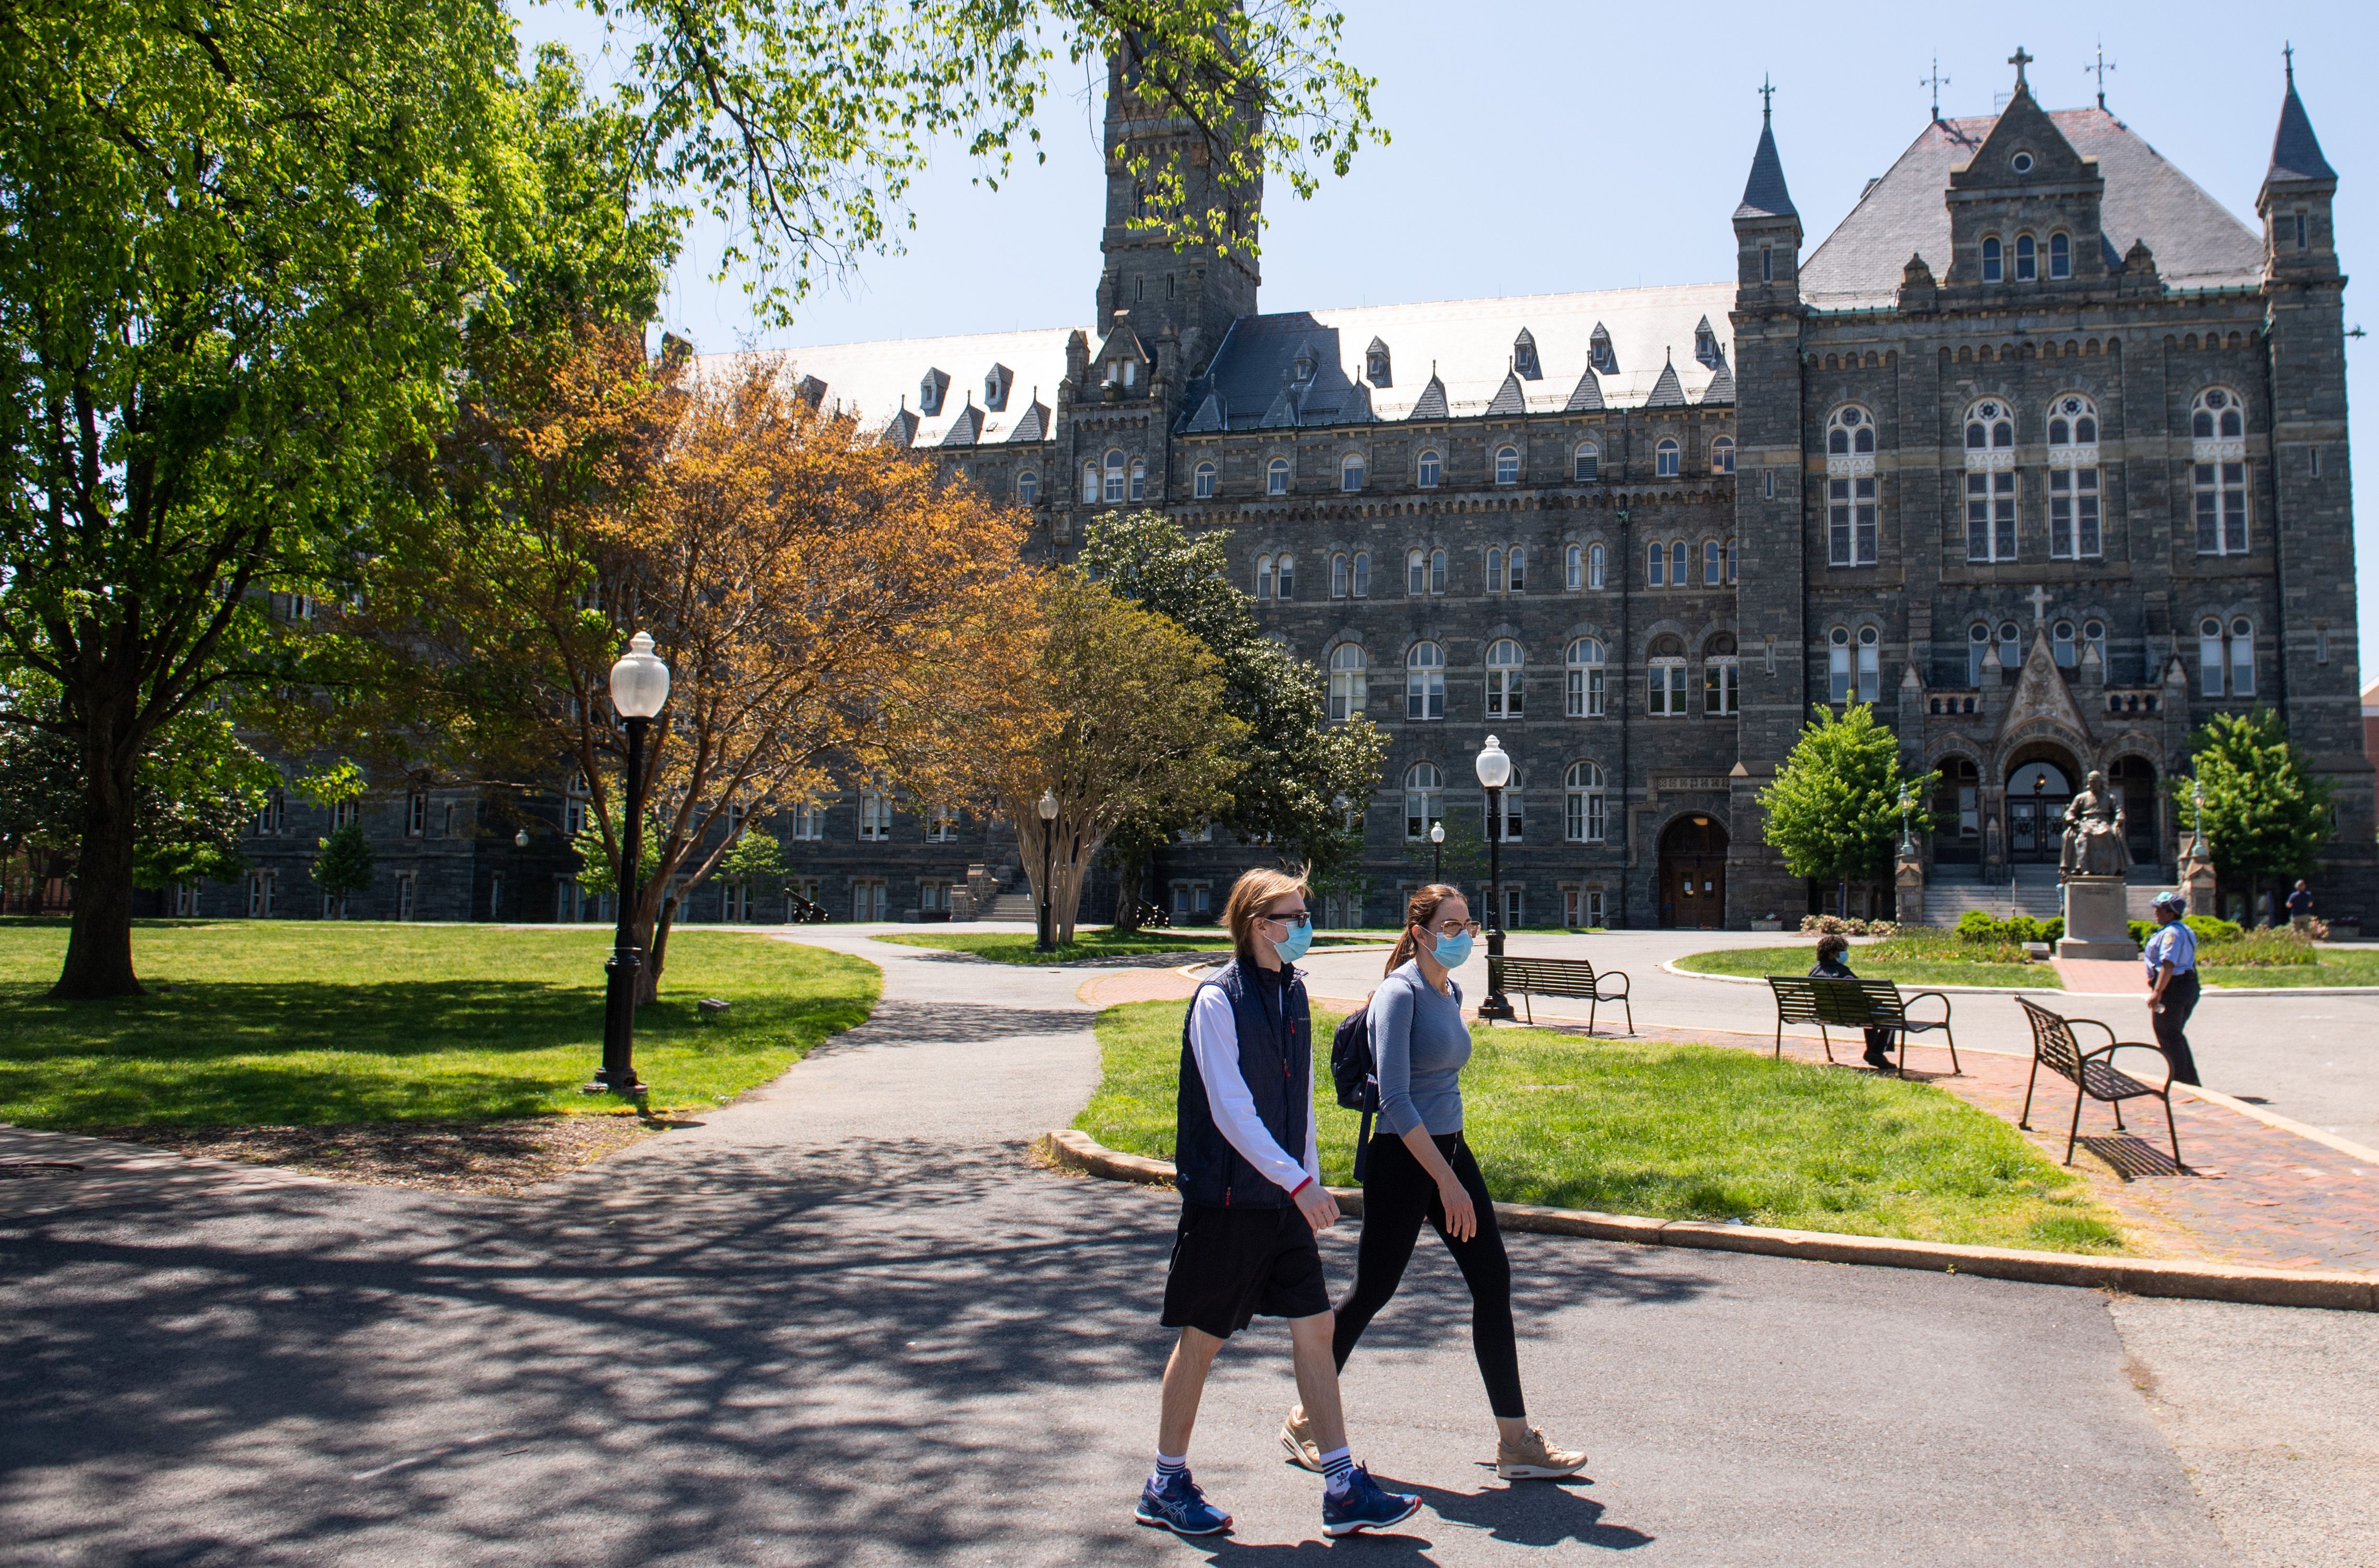 Masked students walk in front of an ornate academic building.